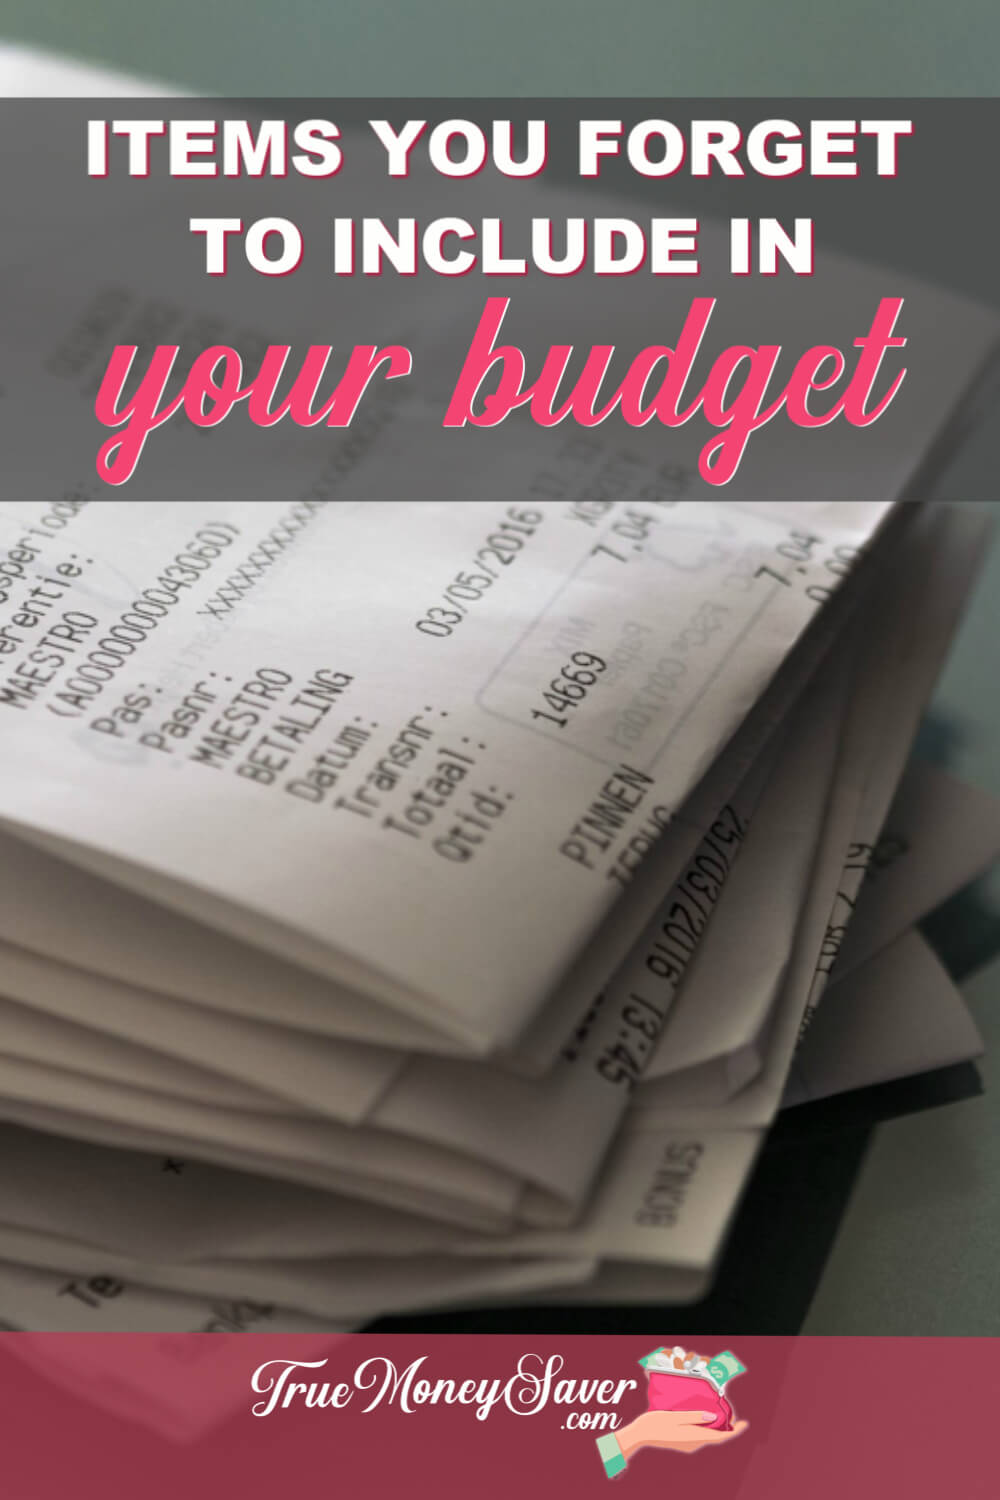 The Items You Are Forgetting To Include In Your Budget